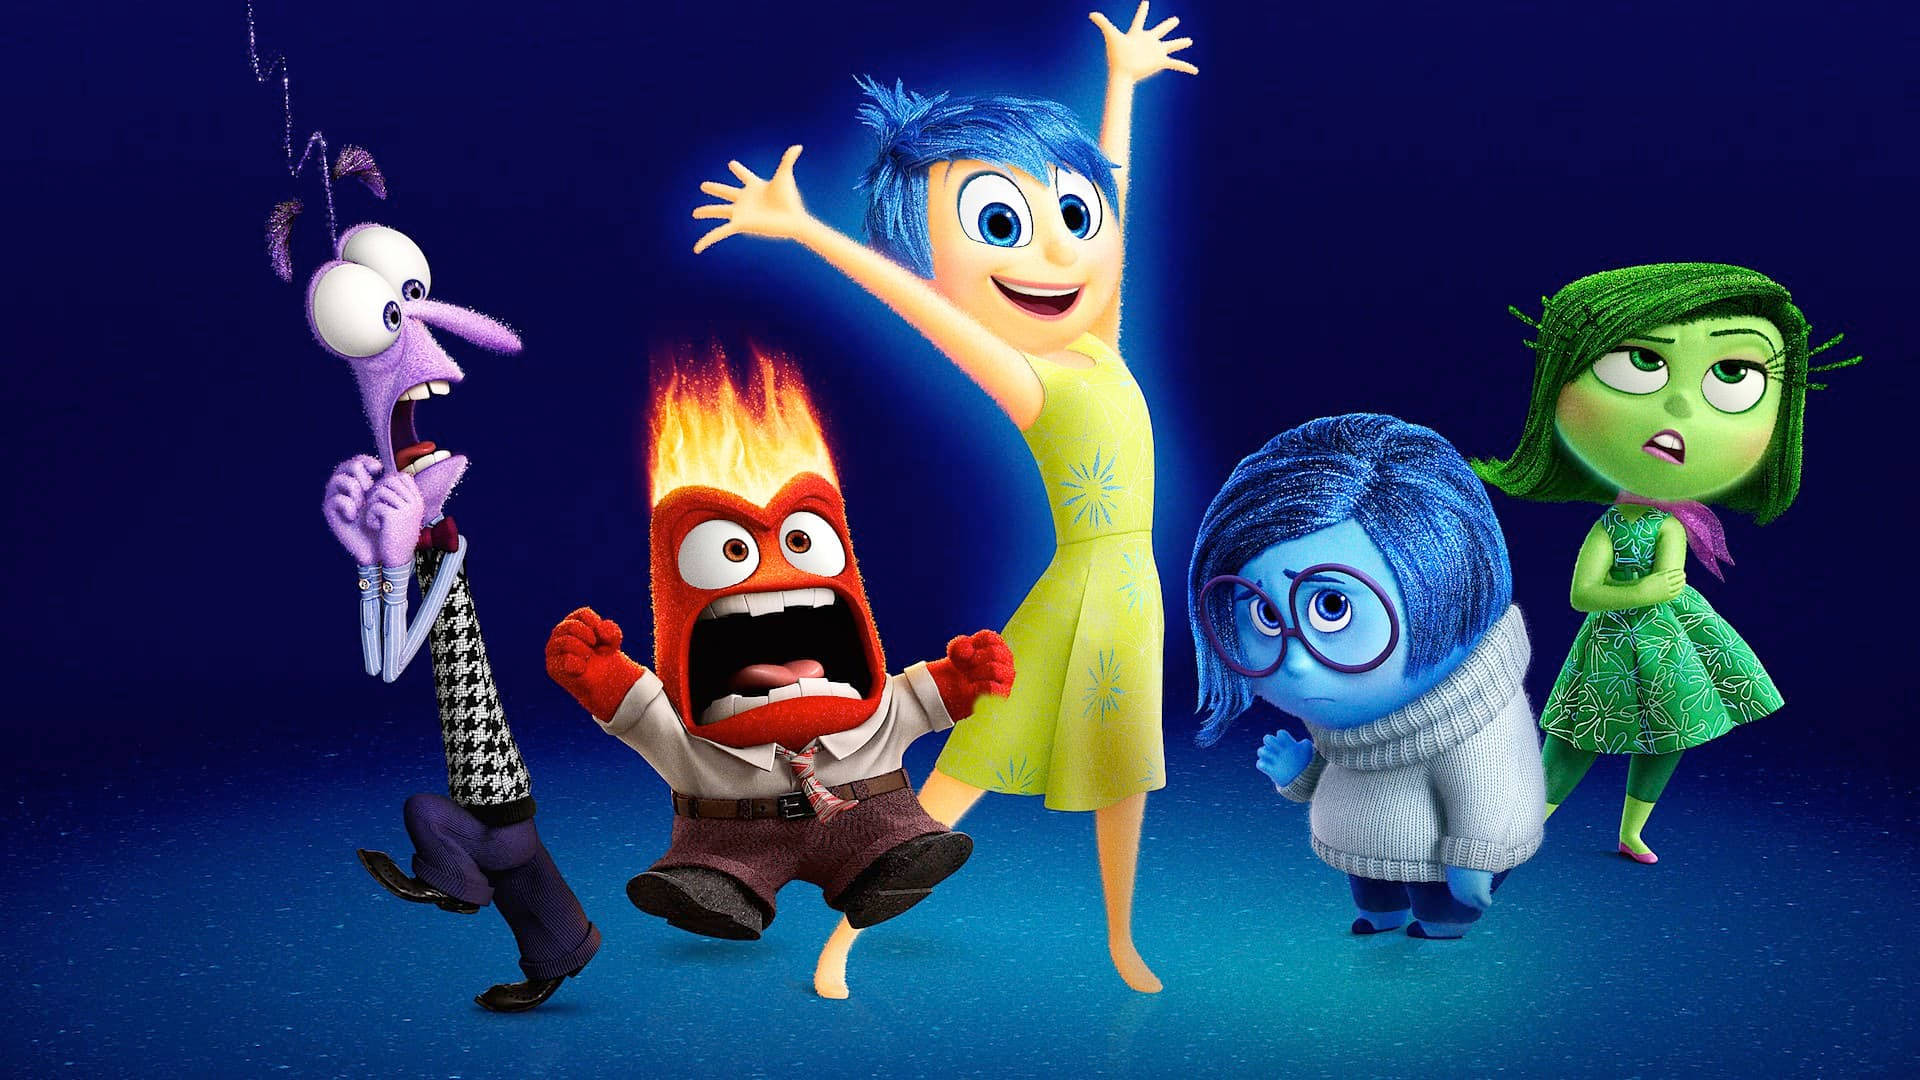 Feelings Take Over Riley, As Her Five Emotions Come To Life In Pixar's Inside Out. Background